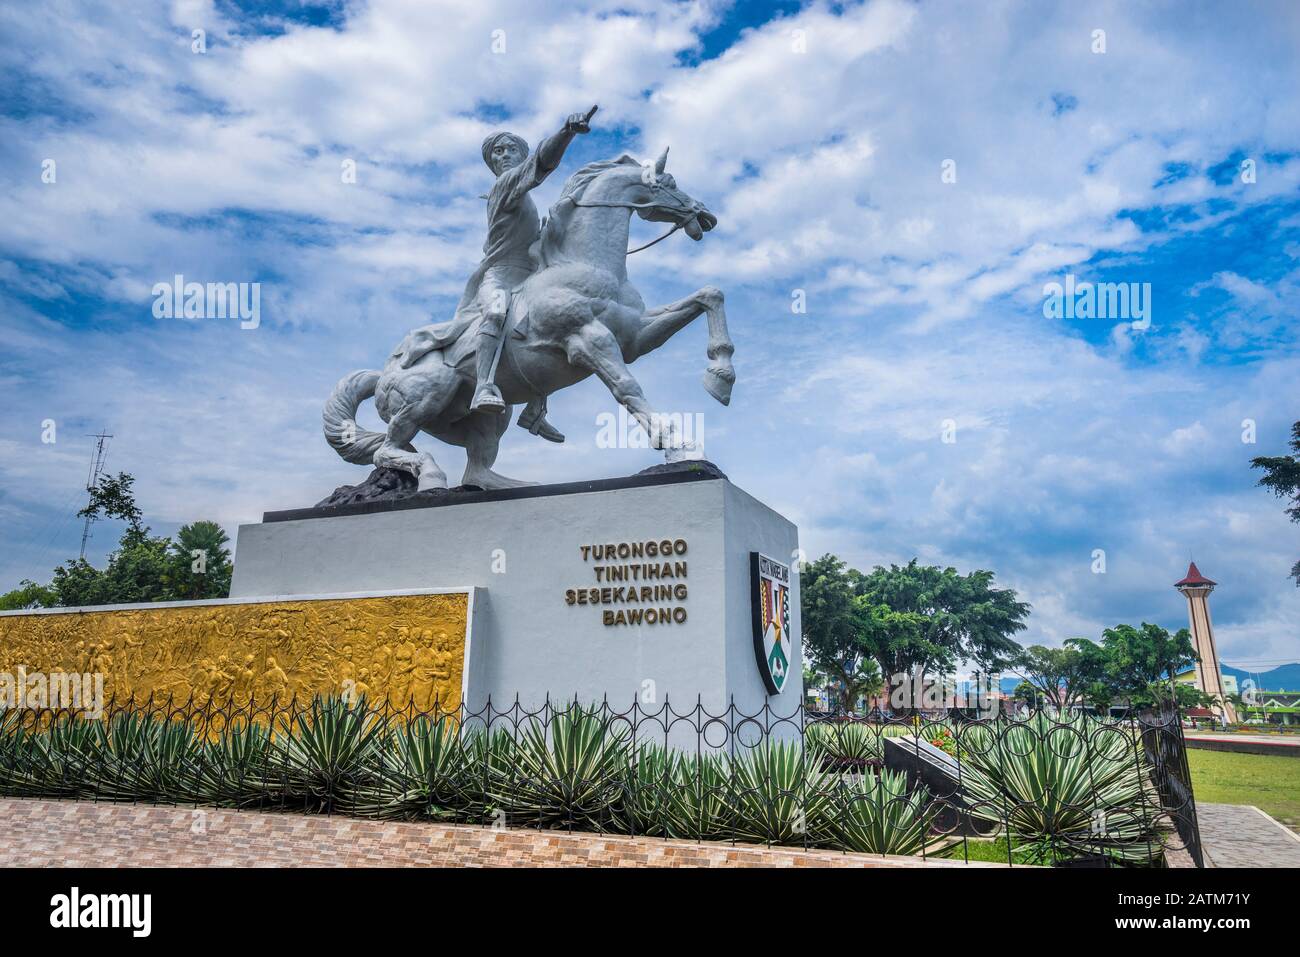 equestrian statue of the Indonesion national hero Prince Diponegoro at the Alun-alun, town square and central park of the central javanese city of Mag Stock Photo